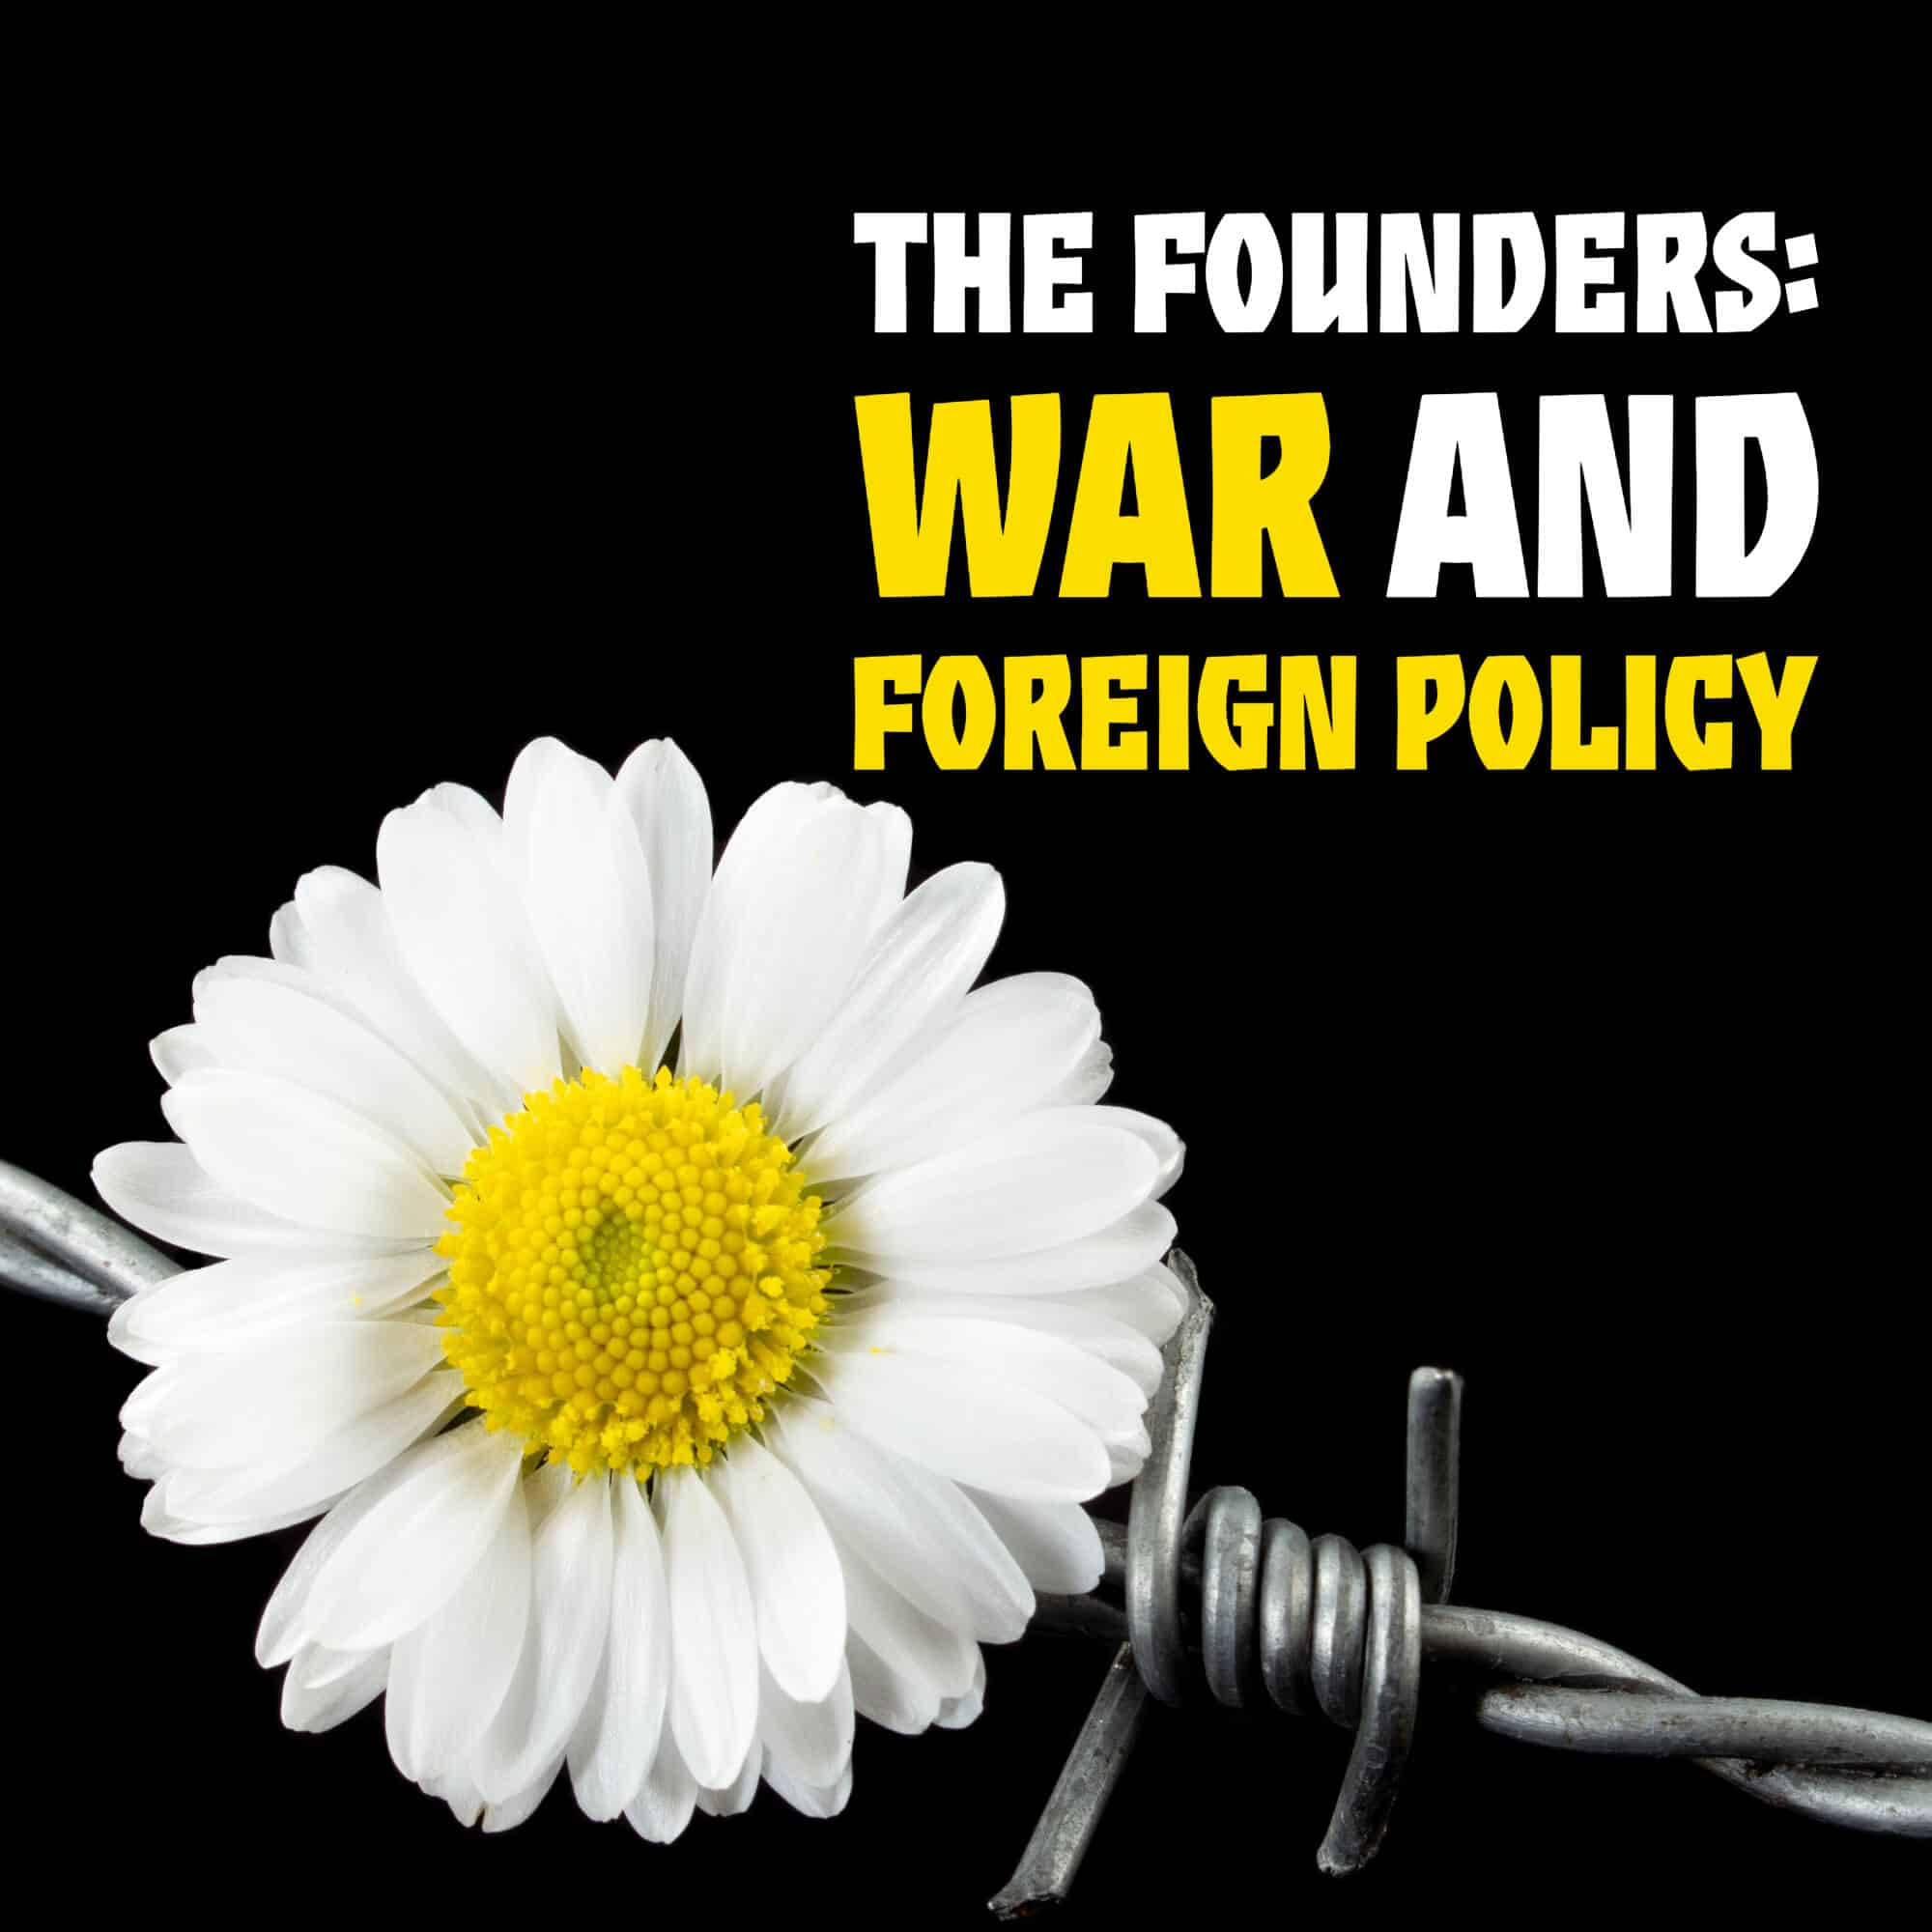 War and Foreign Policy: Top-5 Influences on the Founders